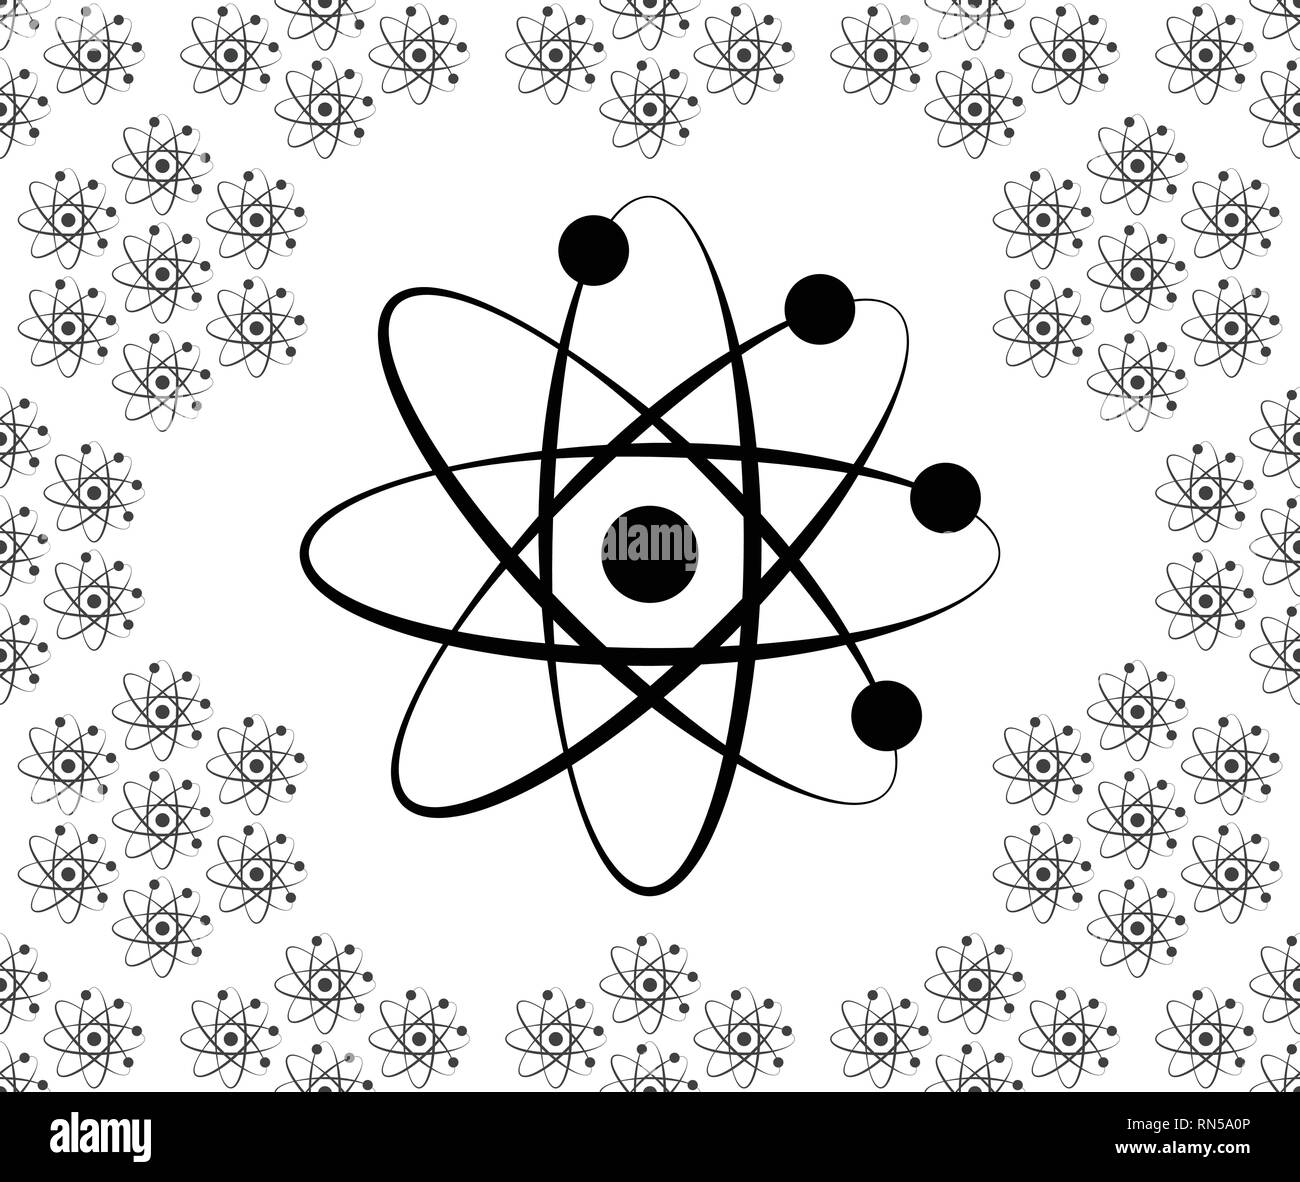 Seamless Atom Texture - Black and White - Science Stock Vector